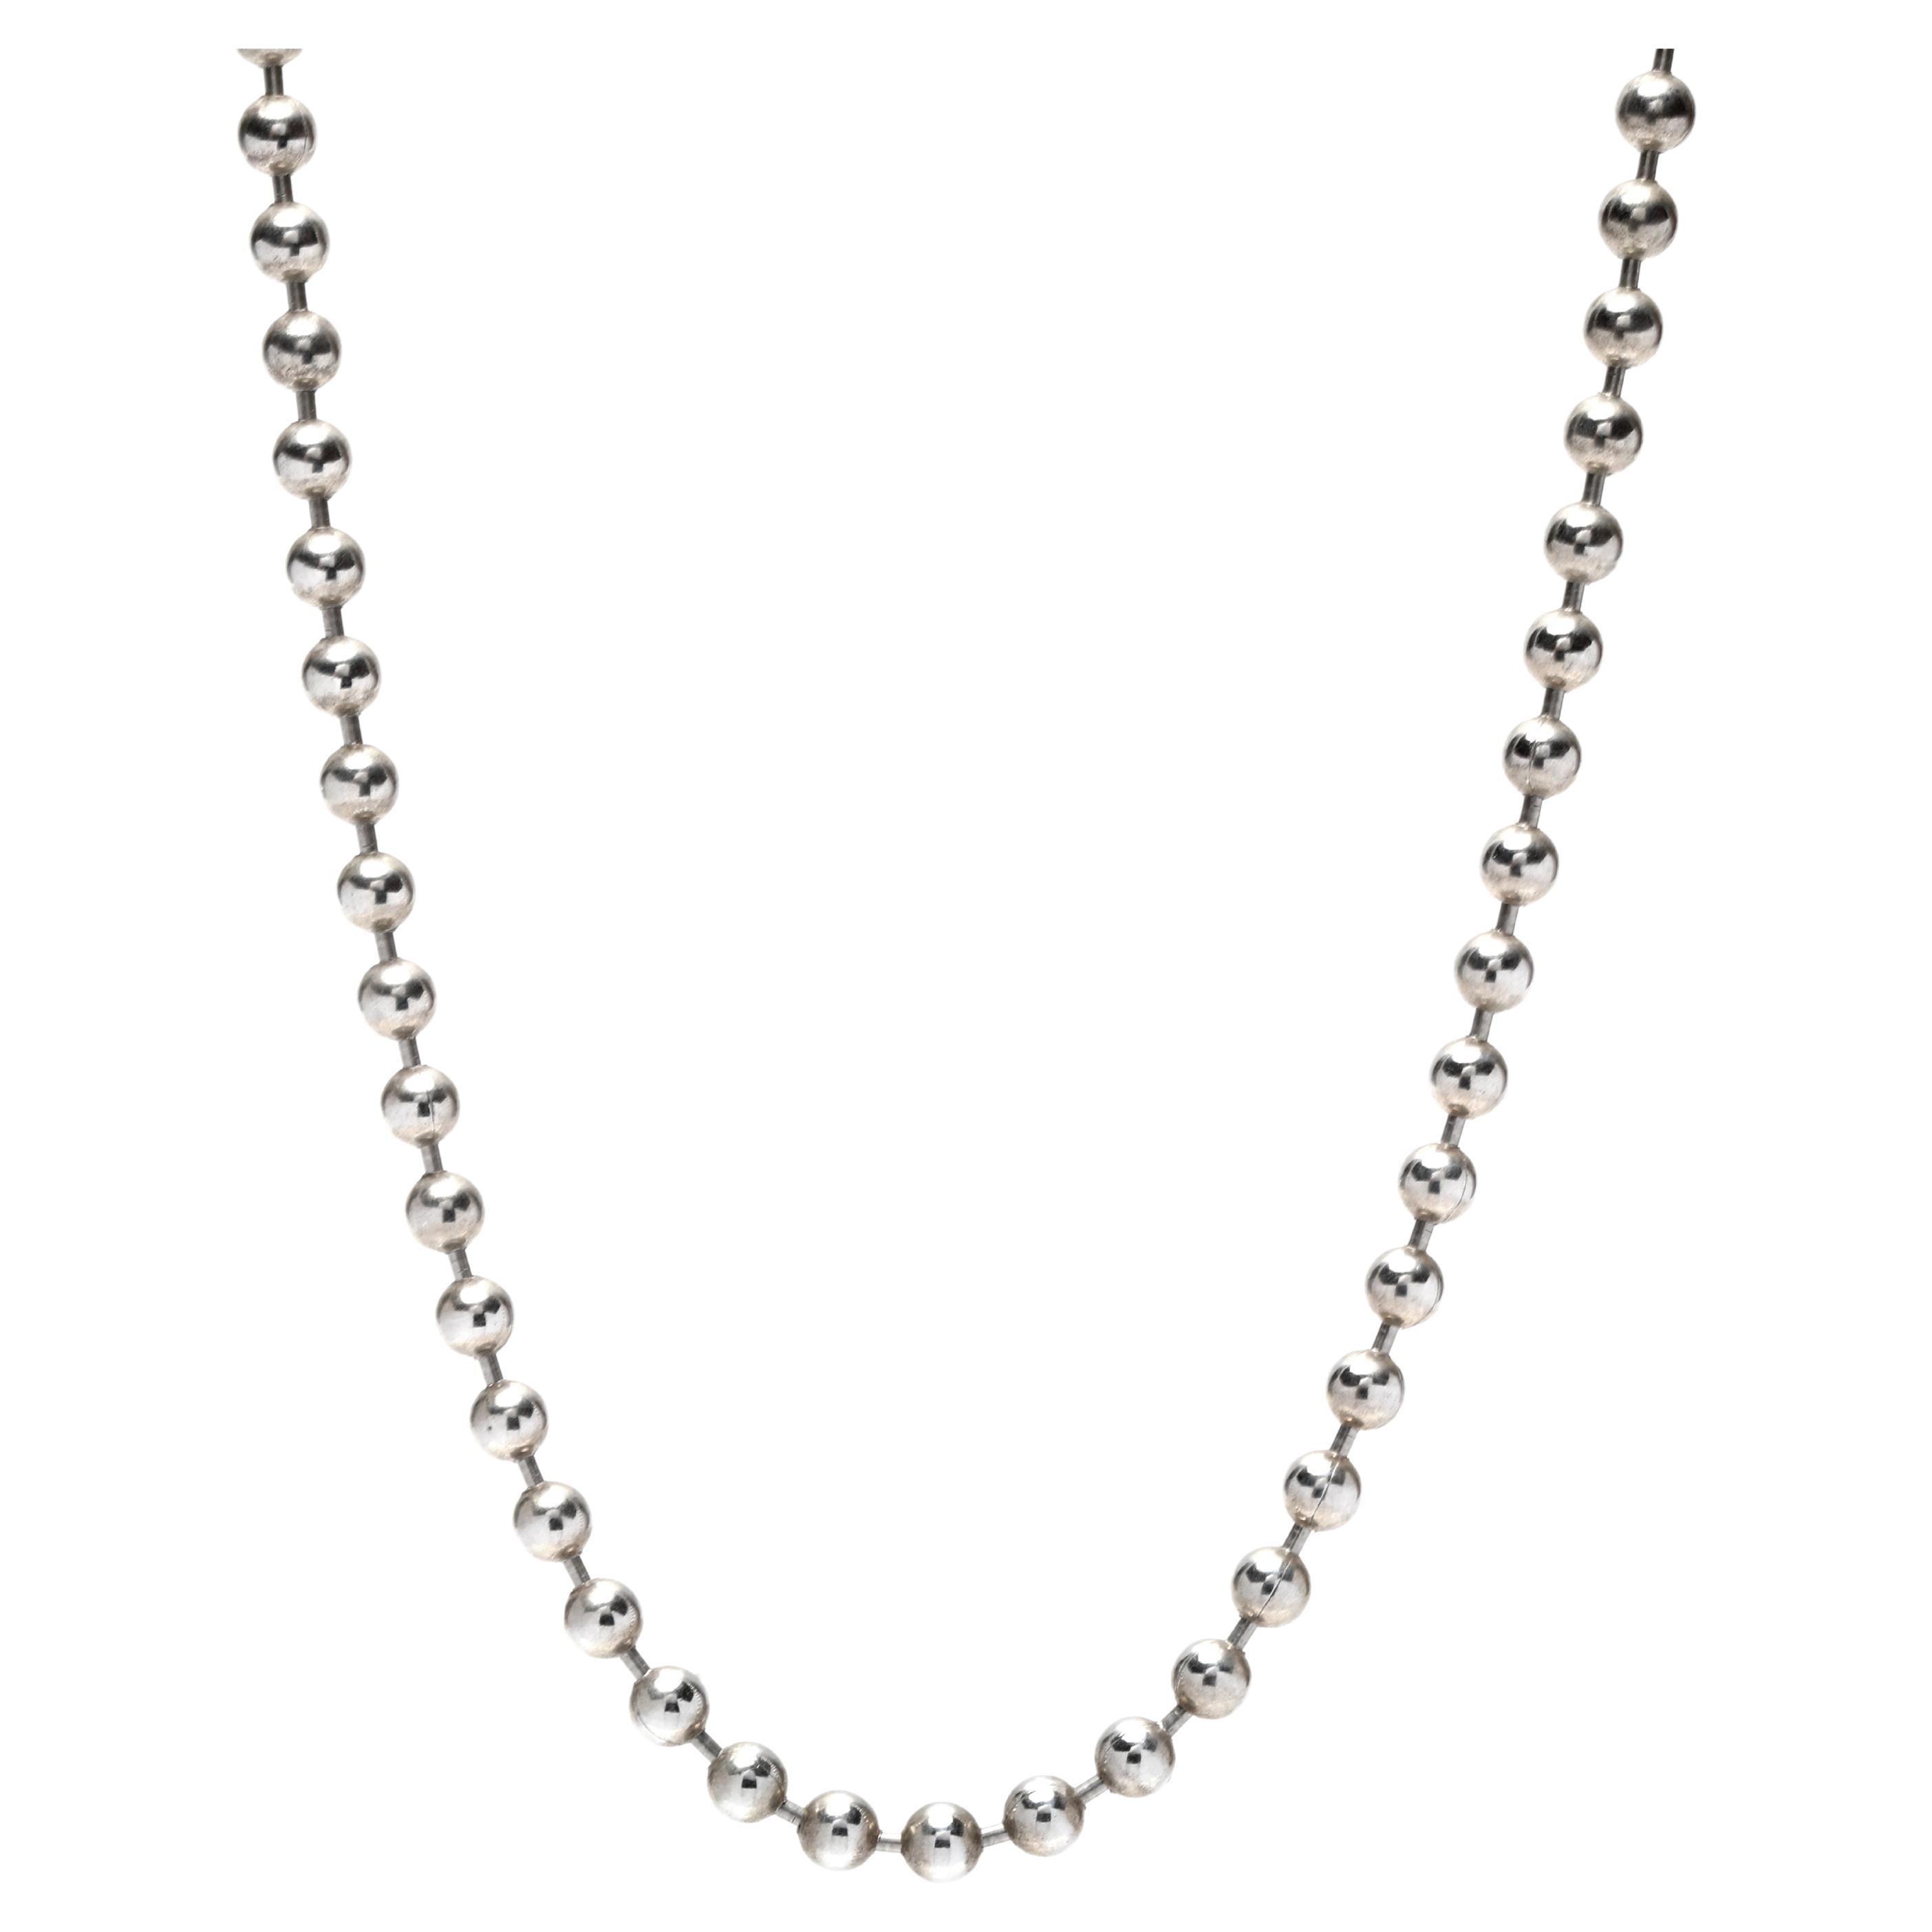 Large Bead Chain Necklace, Sterling Silver, Silver Bead